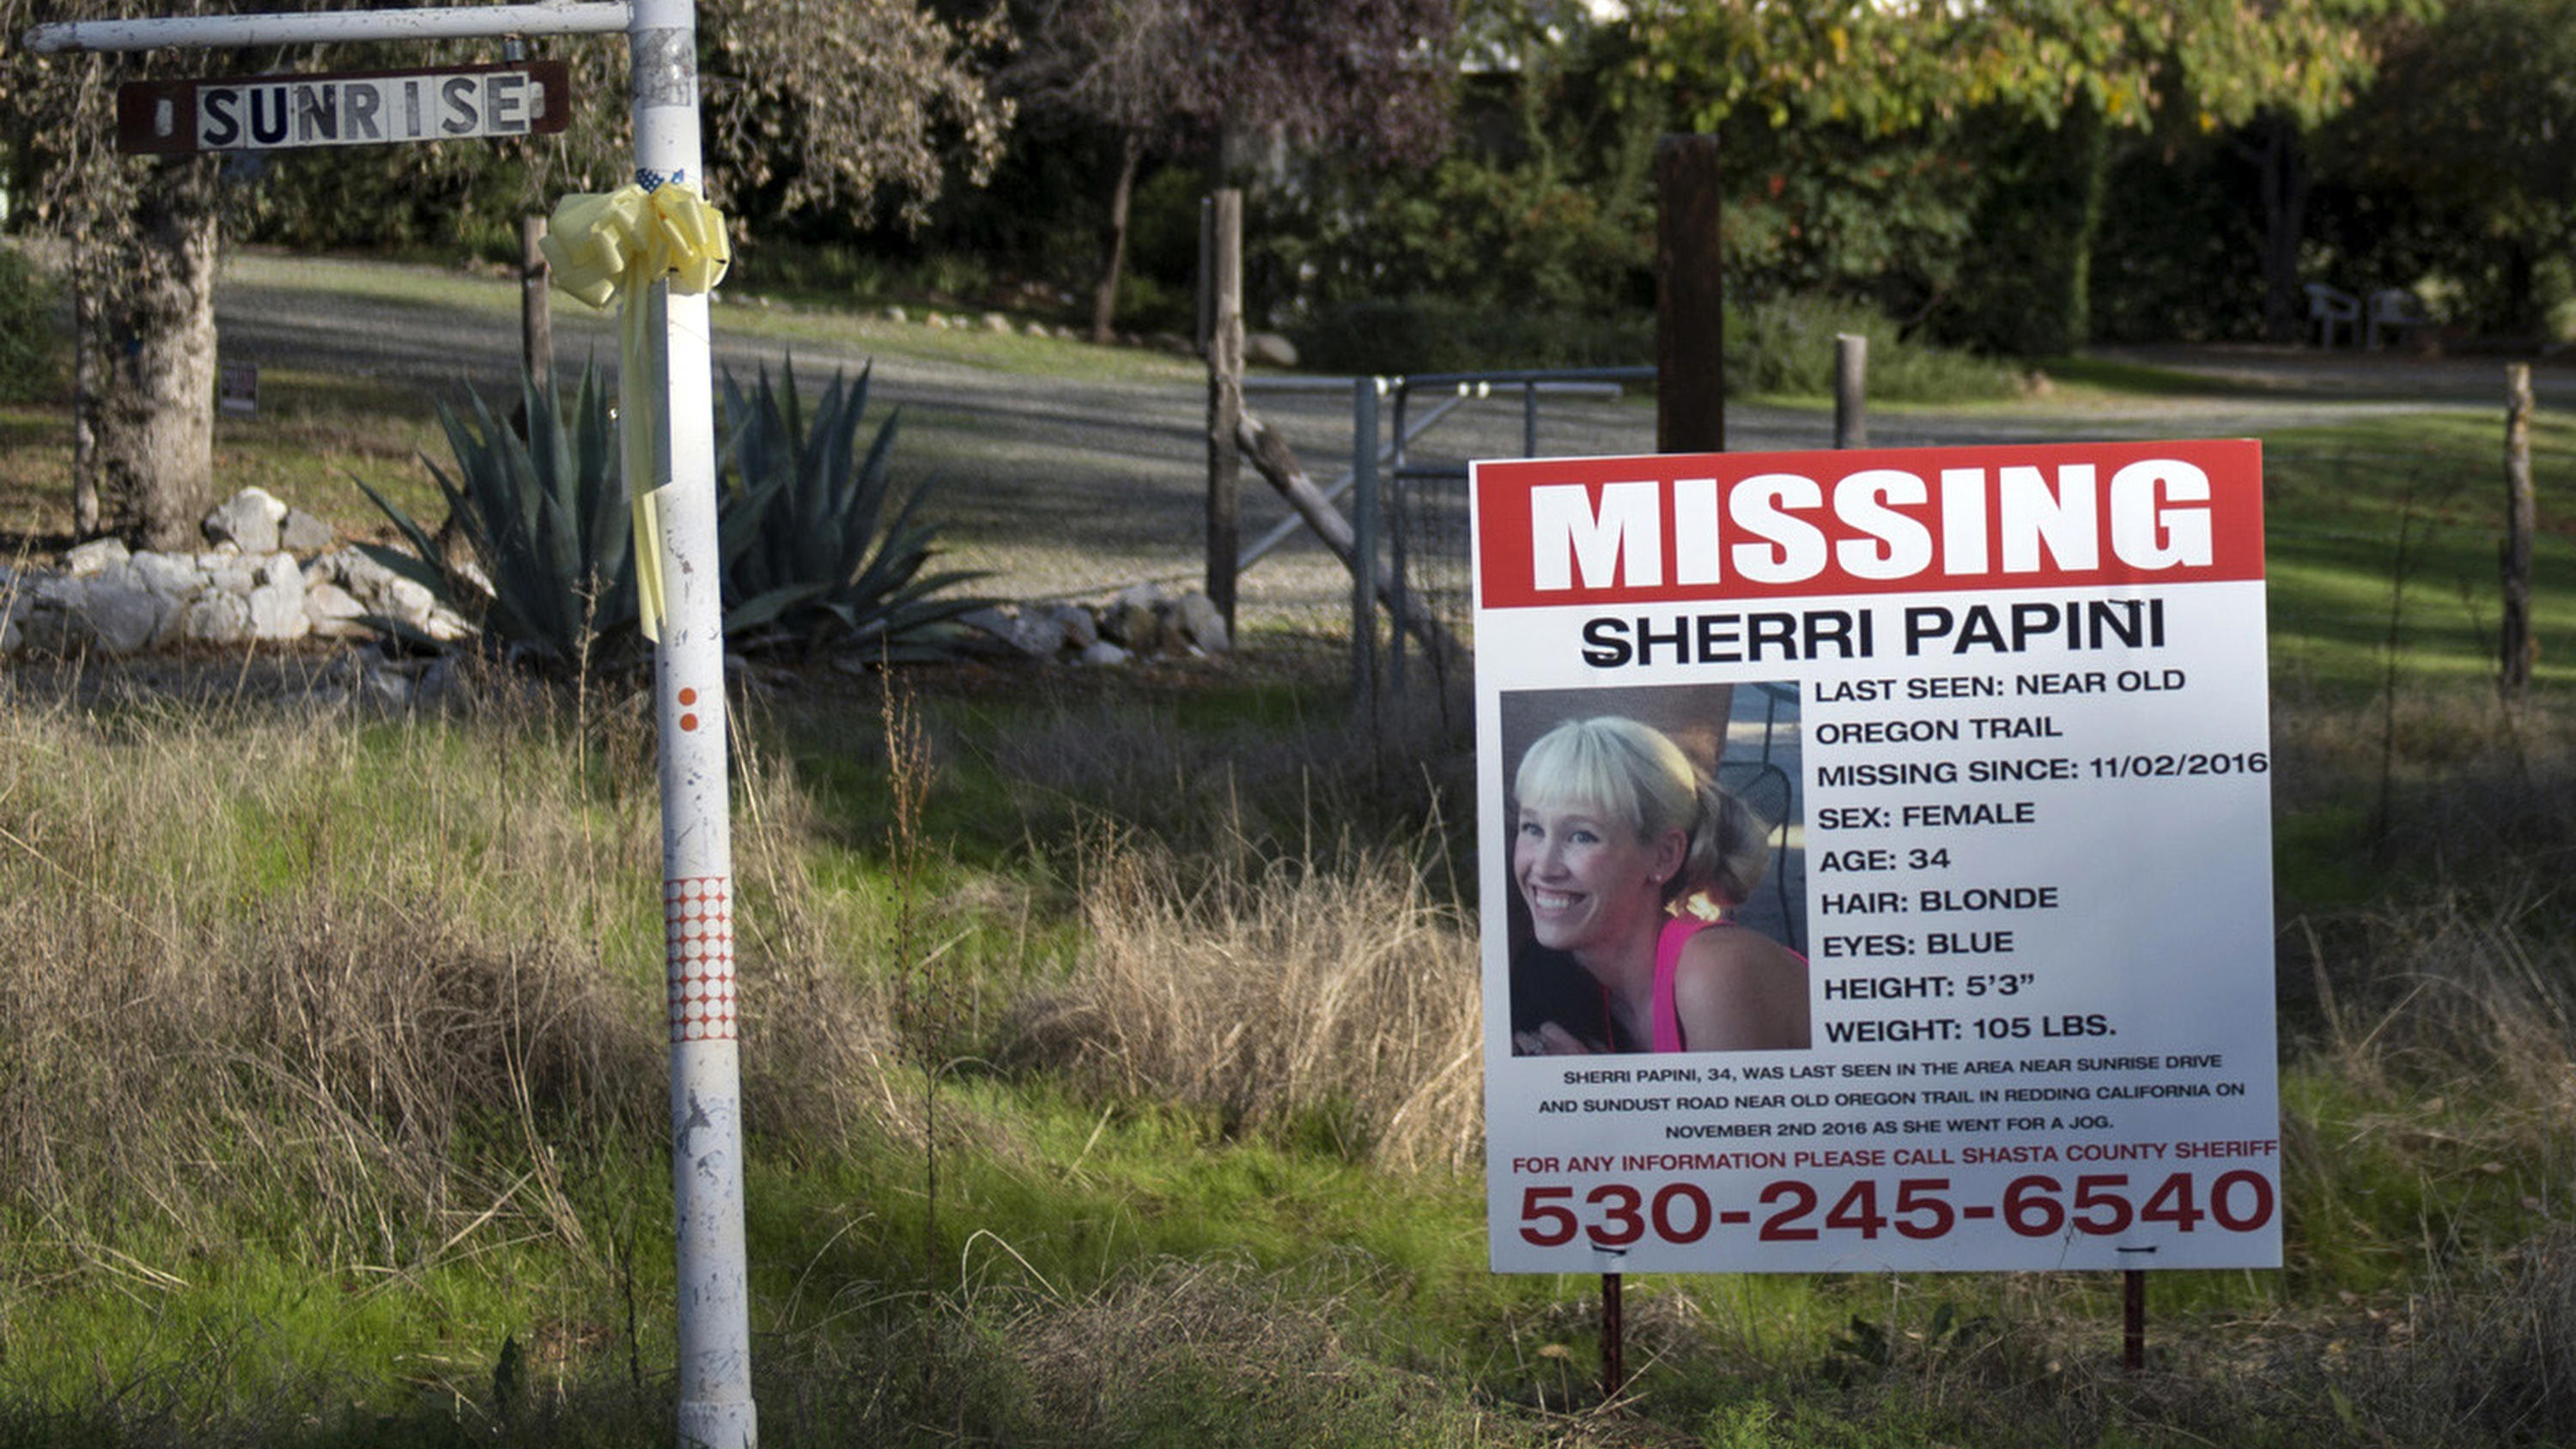 FILE - In this Nov. 10, 2016 file photo, a missing sign for Mountain Gate, Calif., resident Sherri Papini, 34, is placed along side Sunrise Drive, near the location where the mom of two is believed to have gone missing while on a afternoon jog on Nov